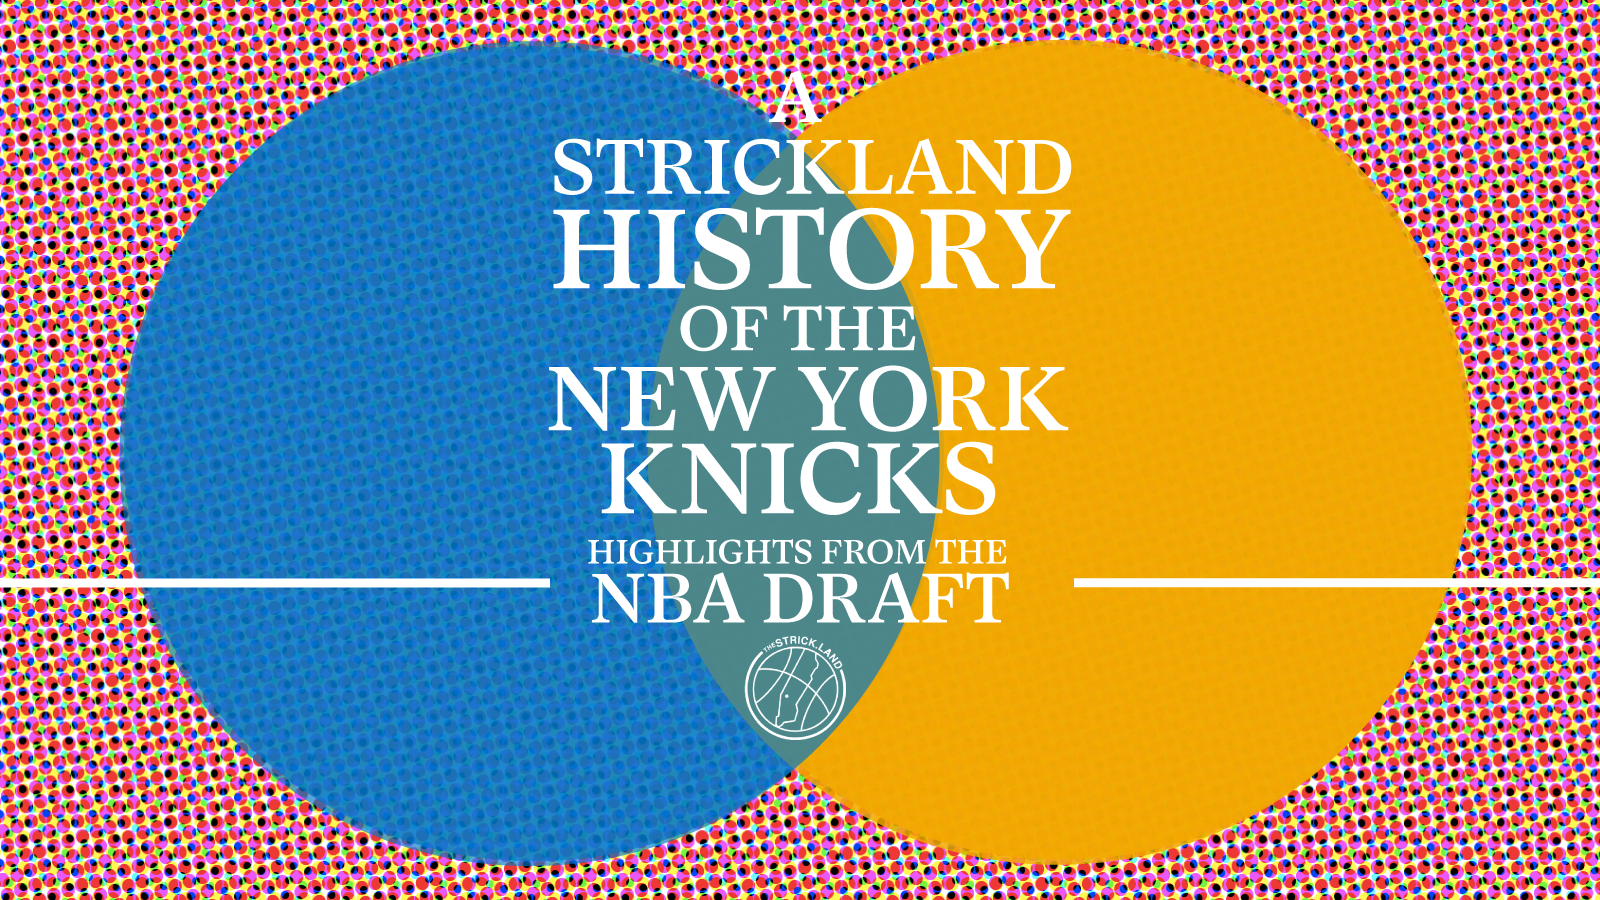 History and trends from the Knicks in the NBA Draft Lottery era